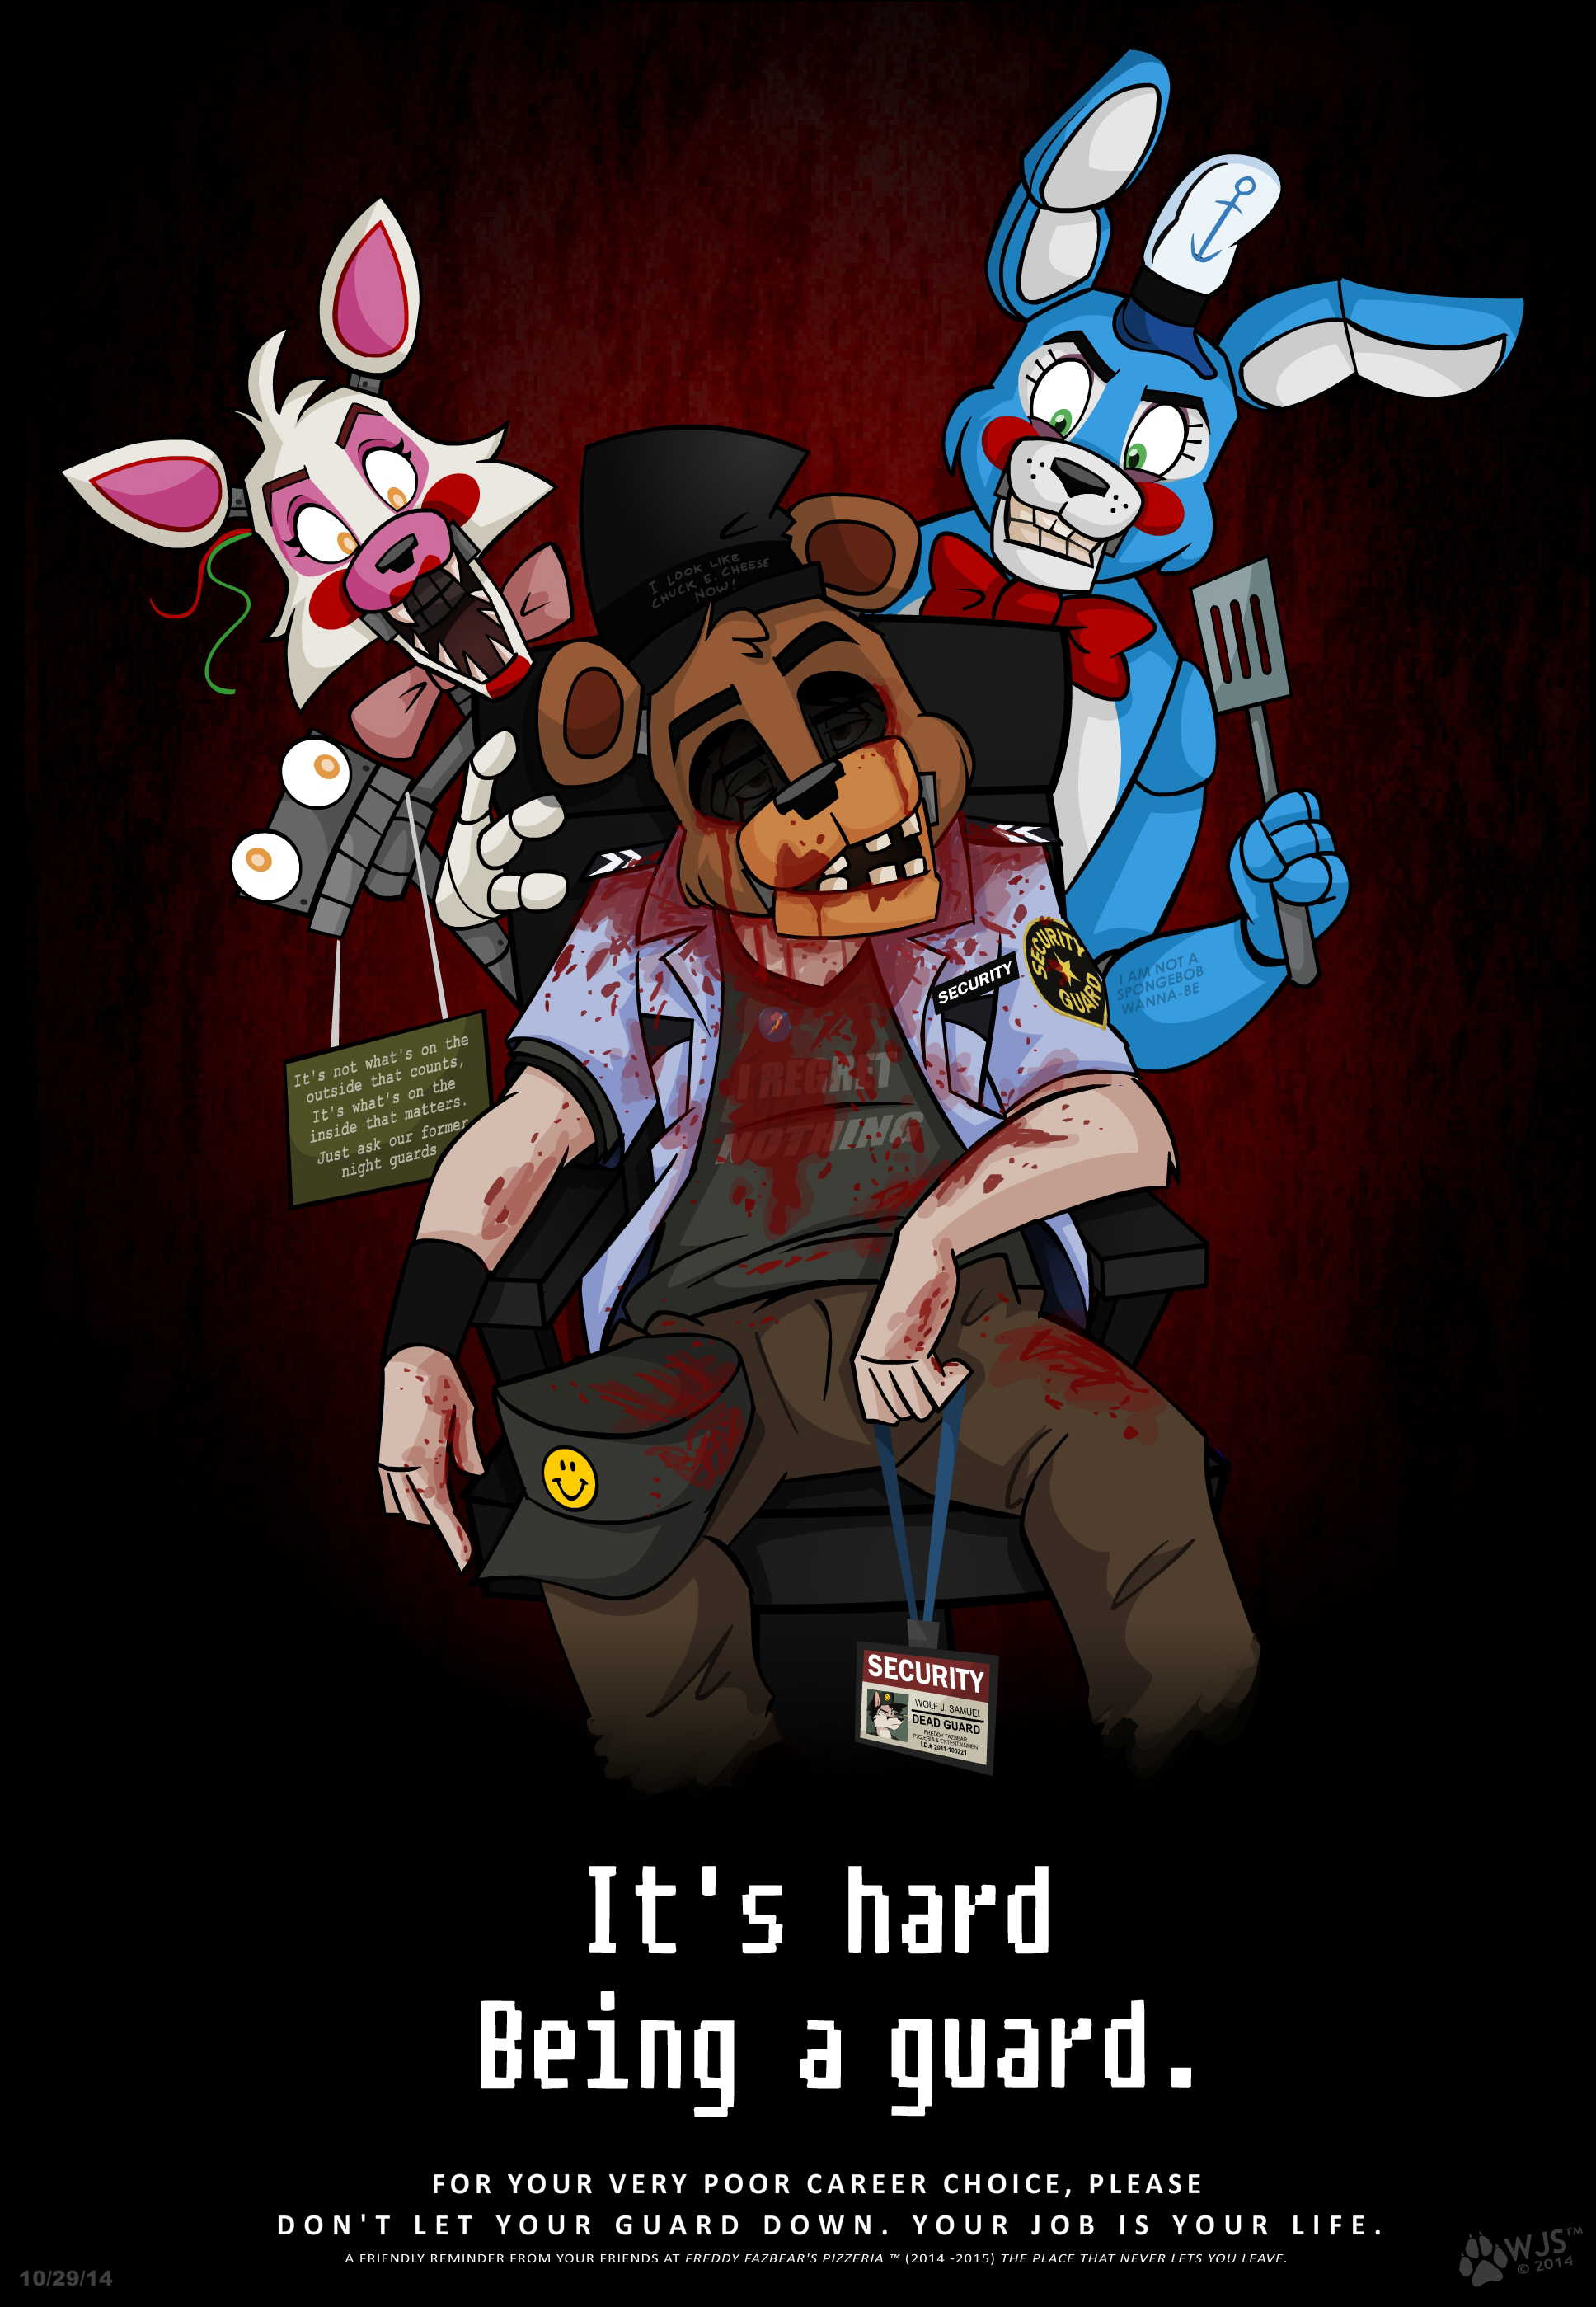 Five Nights at Candy's 3 Demo ALL JUMPSCARES on Make a GIF